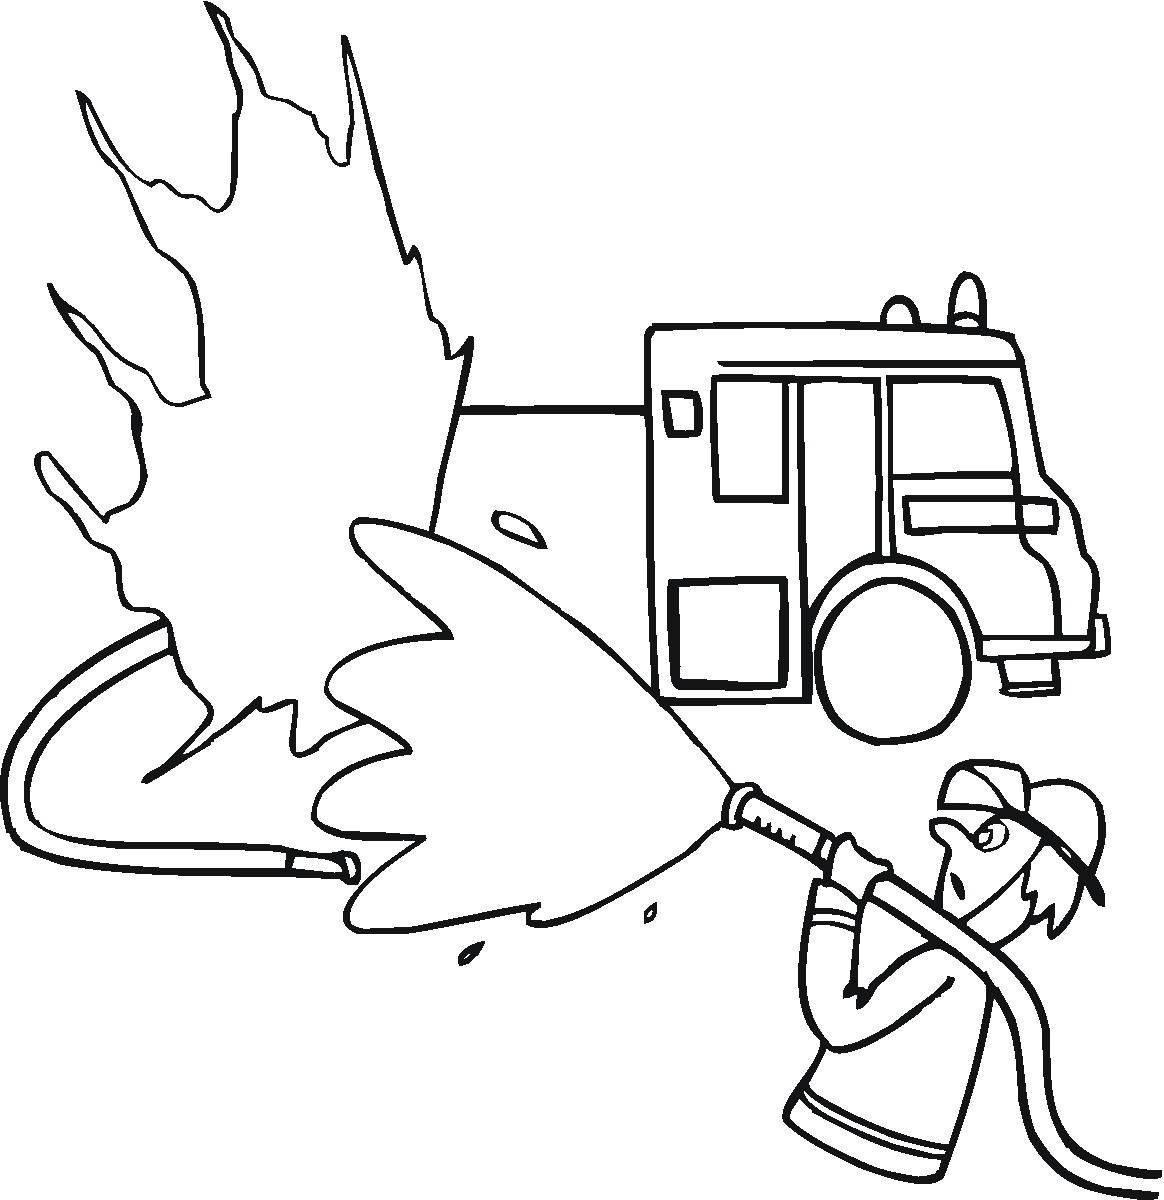 18 Best Fireman Coloring Pages for Kids - Updated 2018